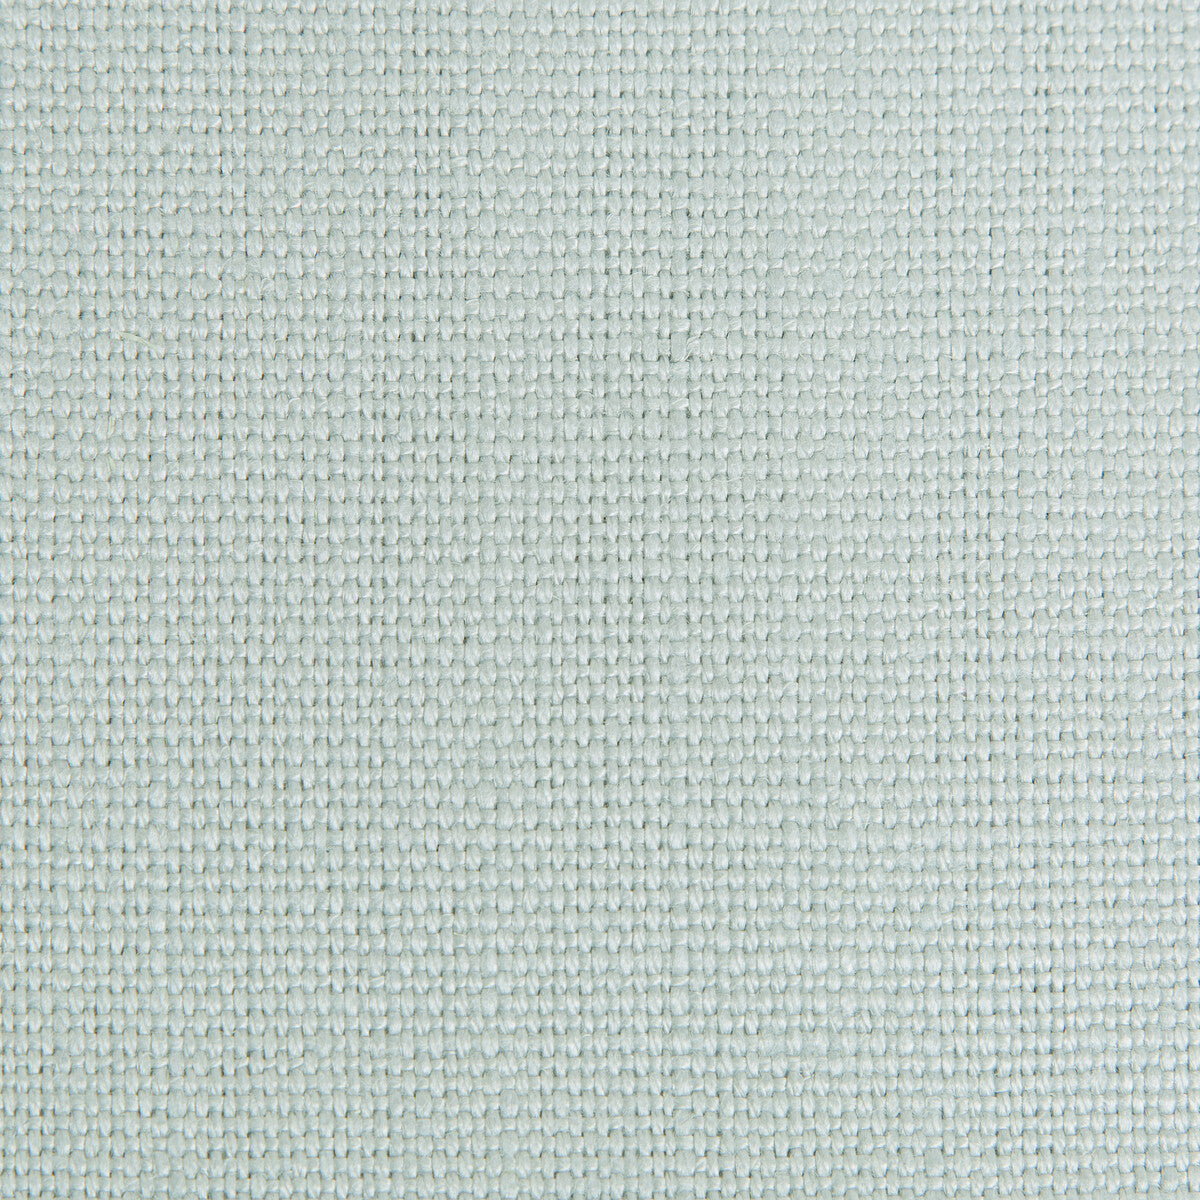 Stone Harbor fabric in sky color - pattern 27591.1501.0 - by Kravet Basics in the The Complete Linen IV collection